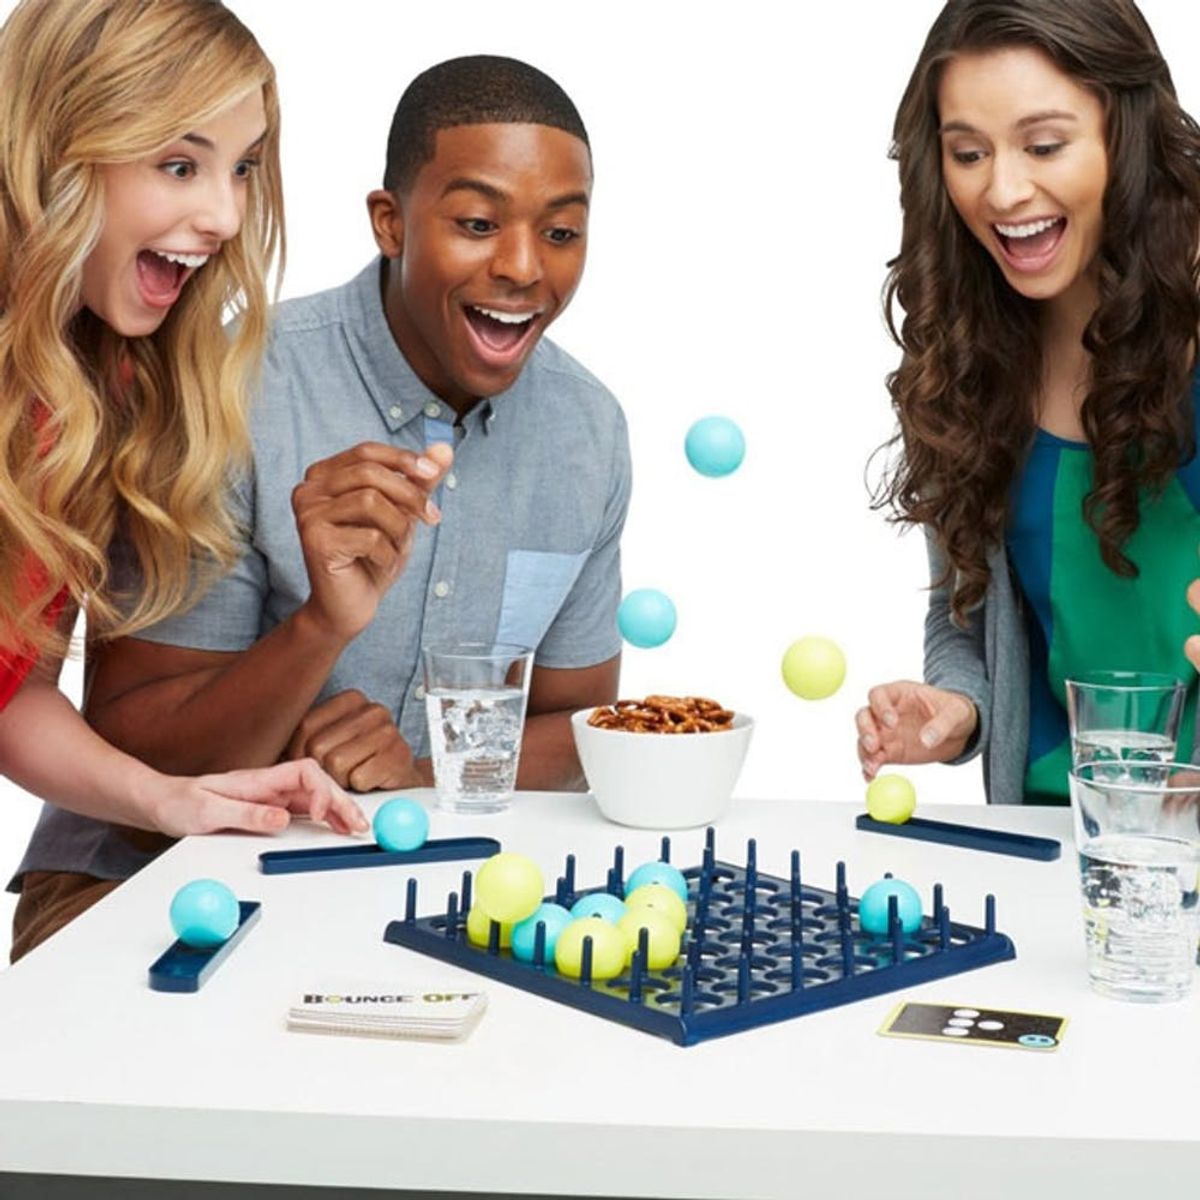 12 Board Games to Put Your Friendships to the Test